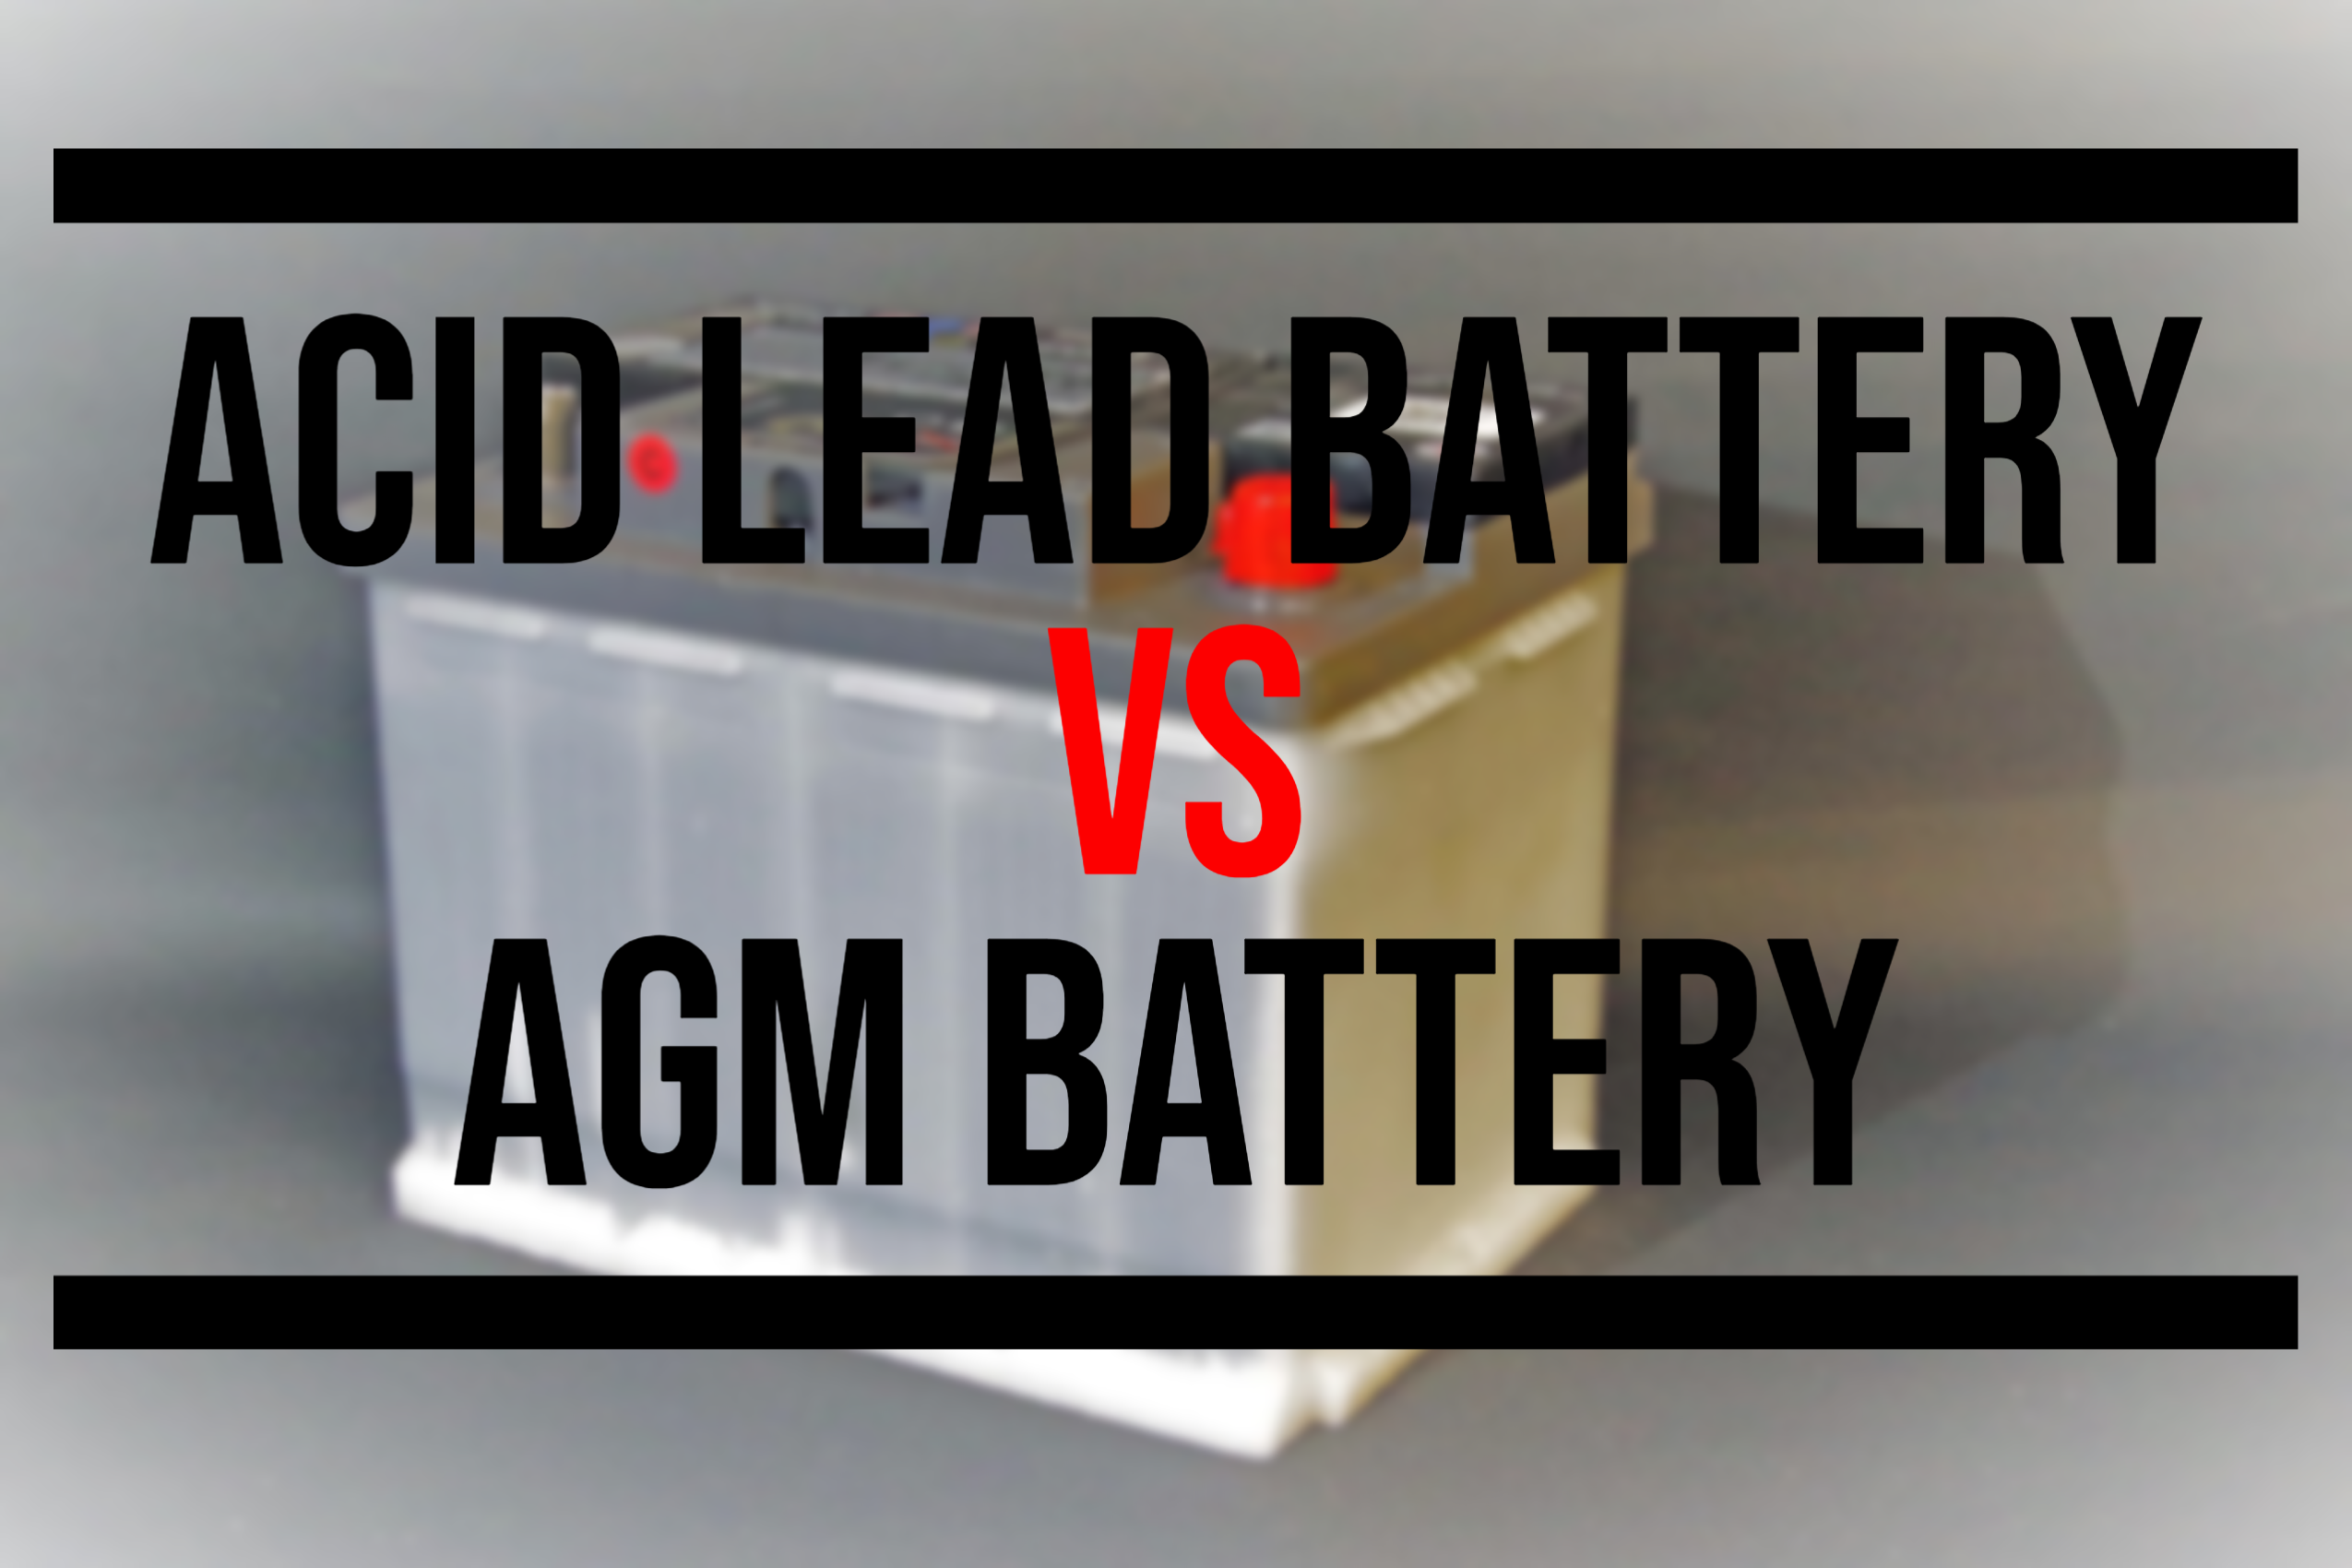 Featured image of acid lead battery vs agm battery